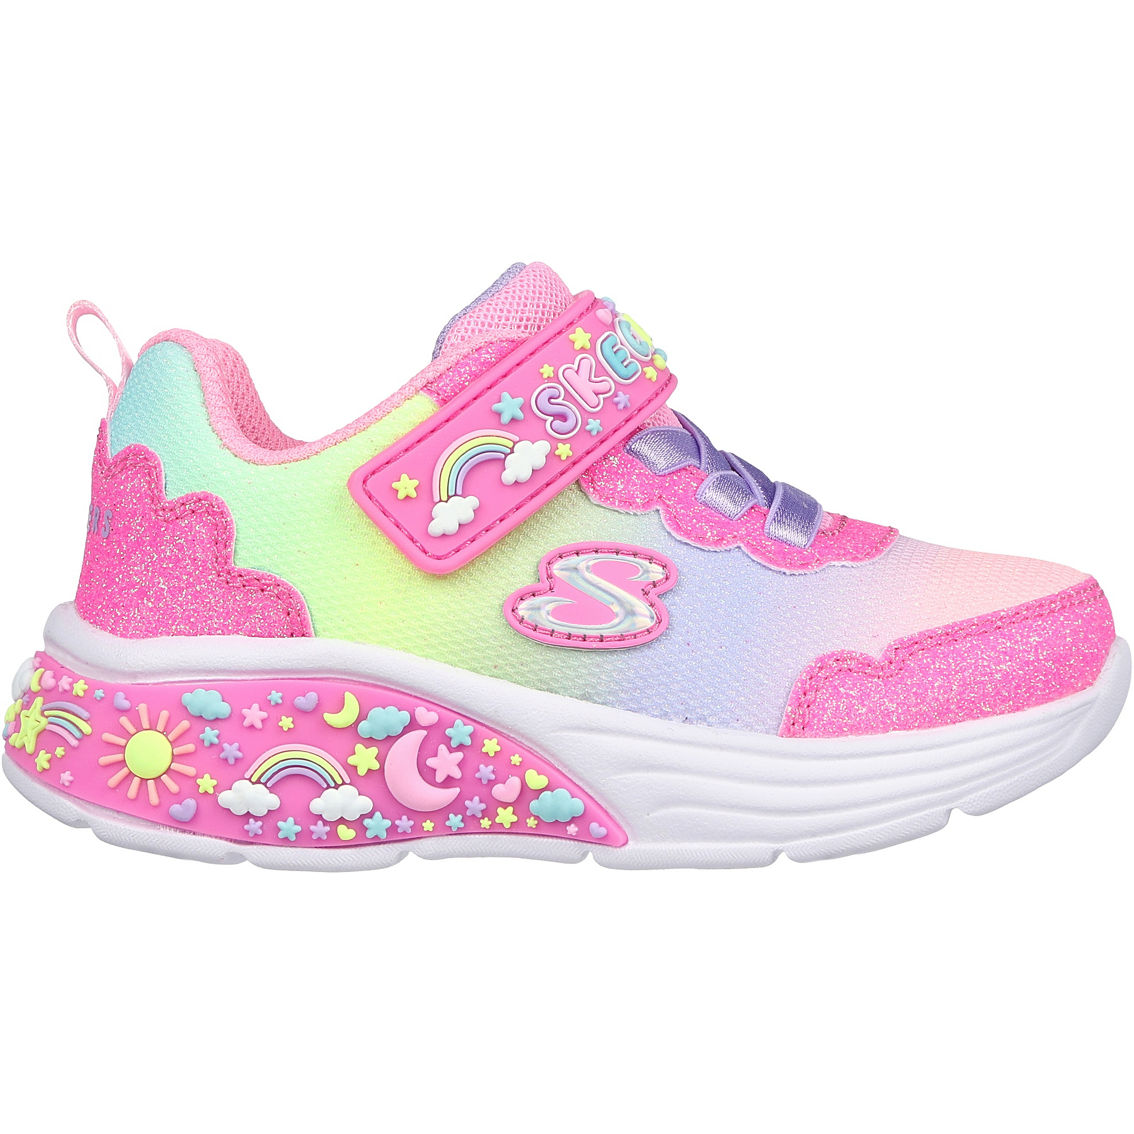 Skechers Toddler Girls My Dreamers Shoes - Image 2 of 6